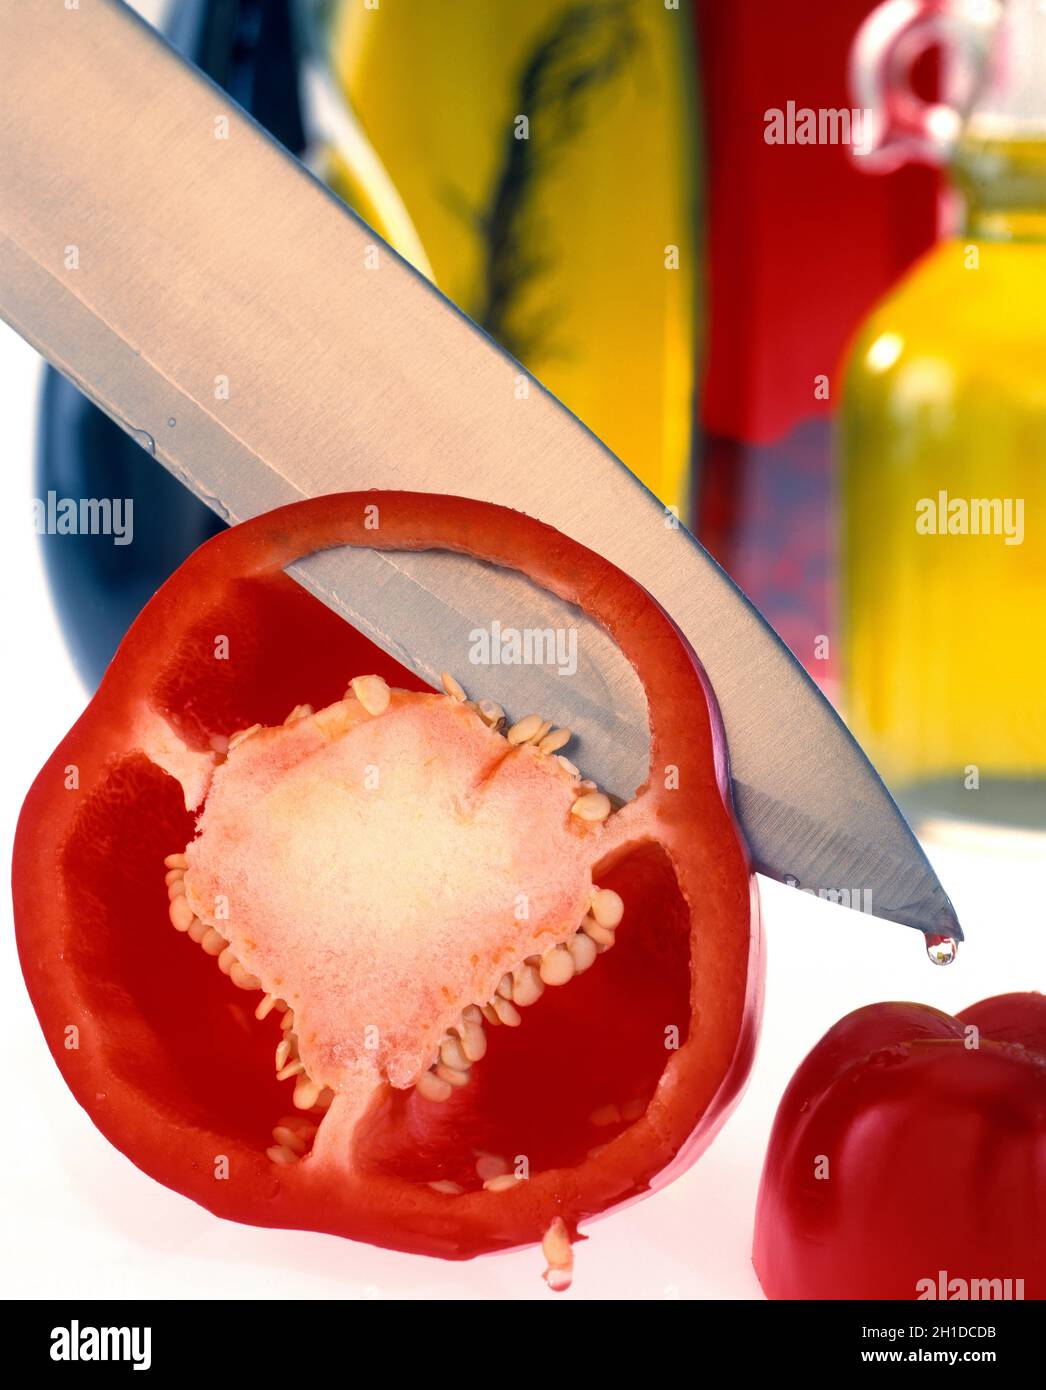 Steel knife cutting slice red pepper on white background soft focus coloured bottles in background Stock Photo